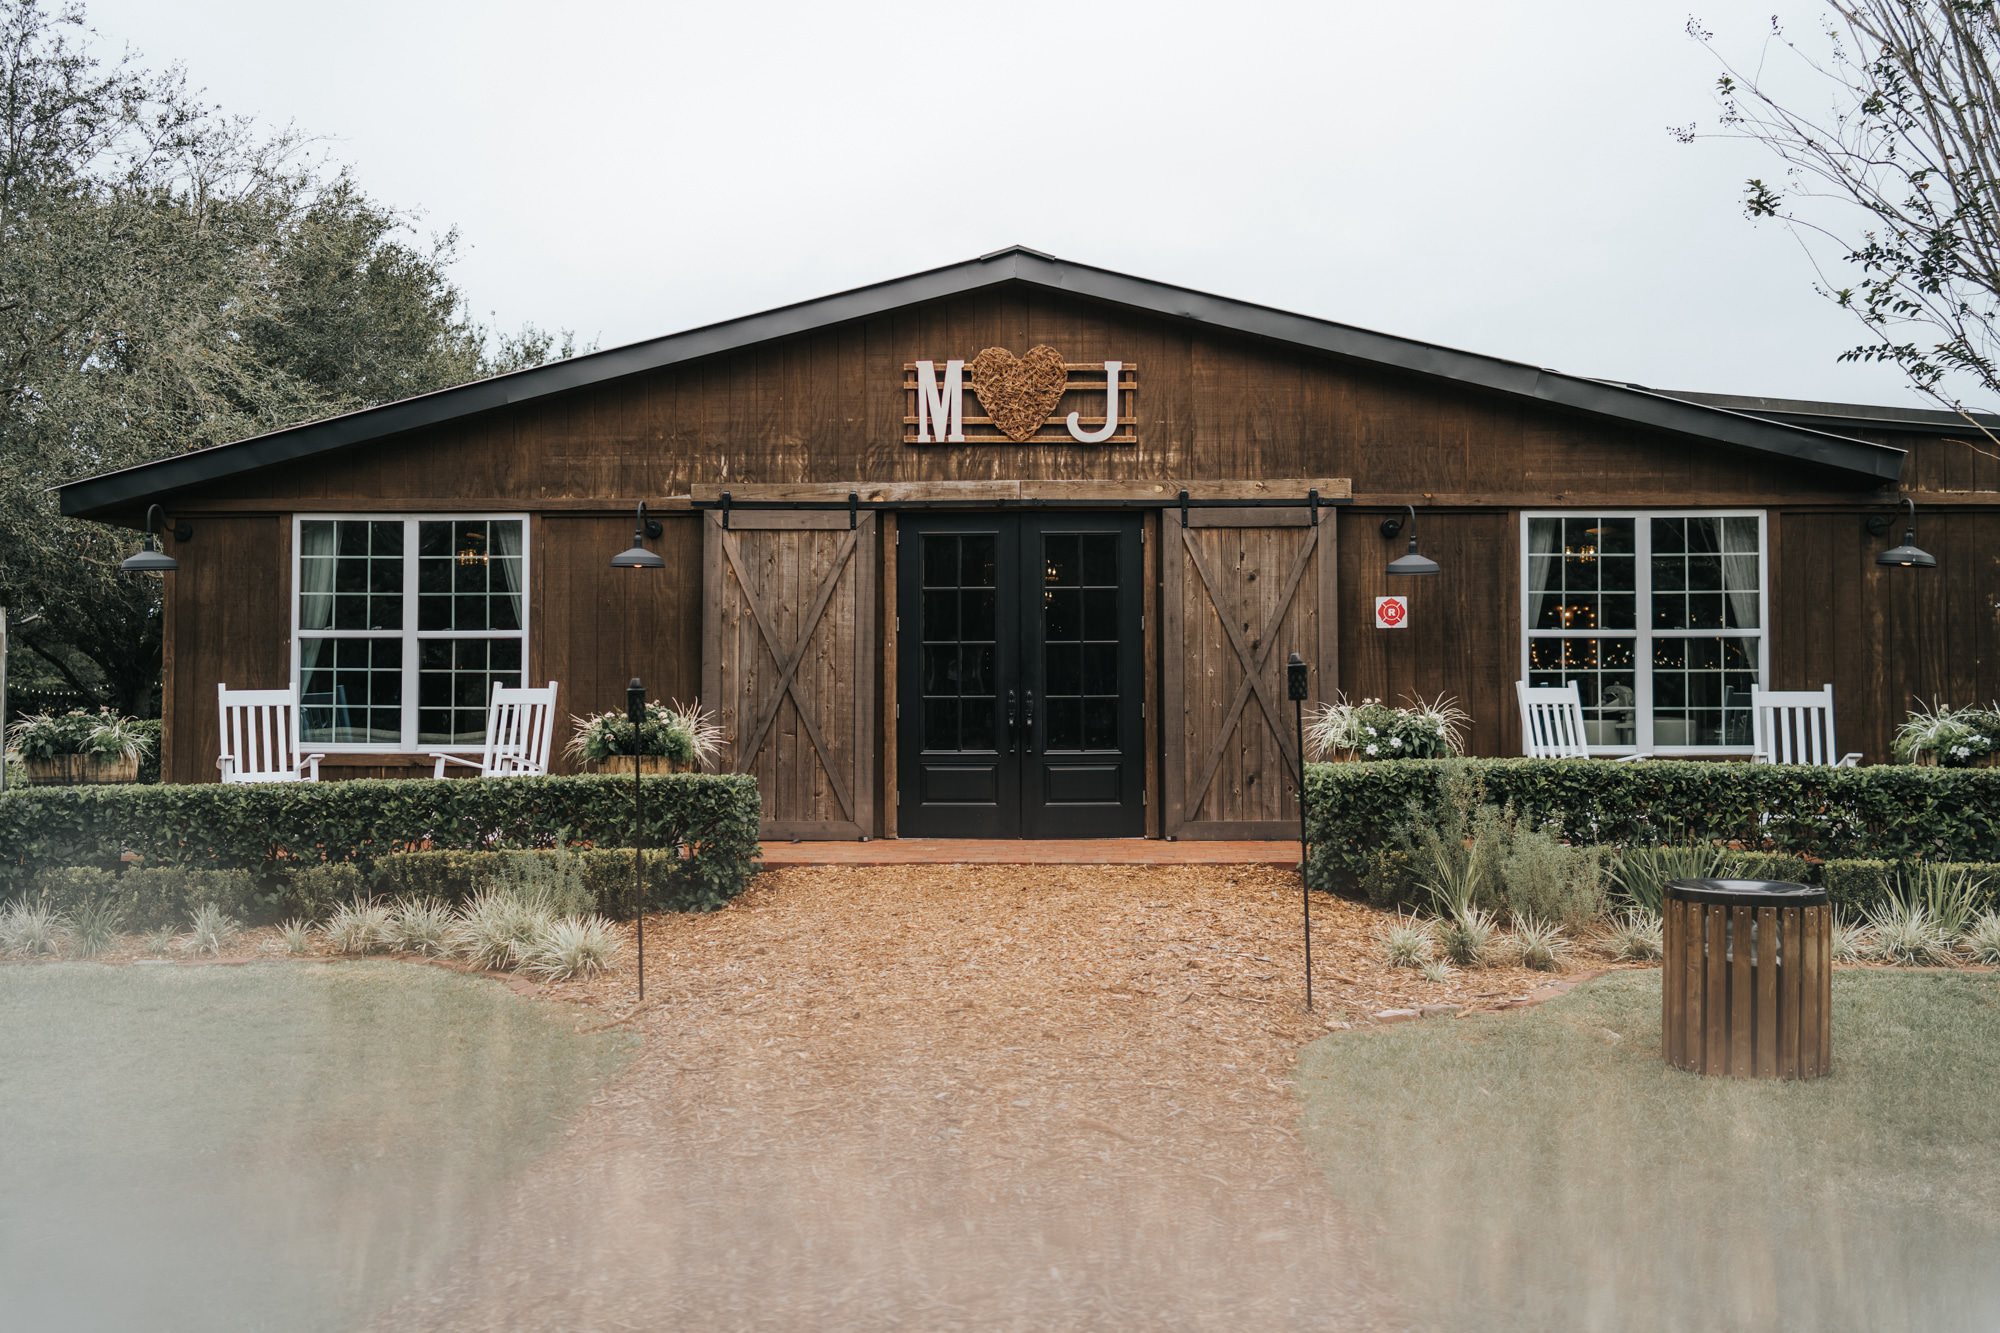 Rustic Dover Wedding Farm Barn Ranch Reception with Bride and Groom Monogram Letters over Barn Doors